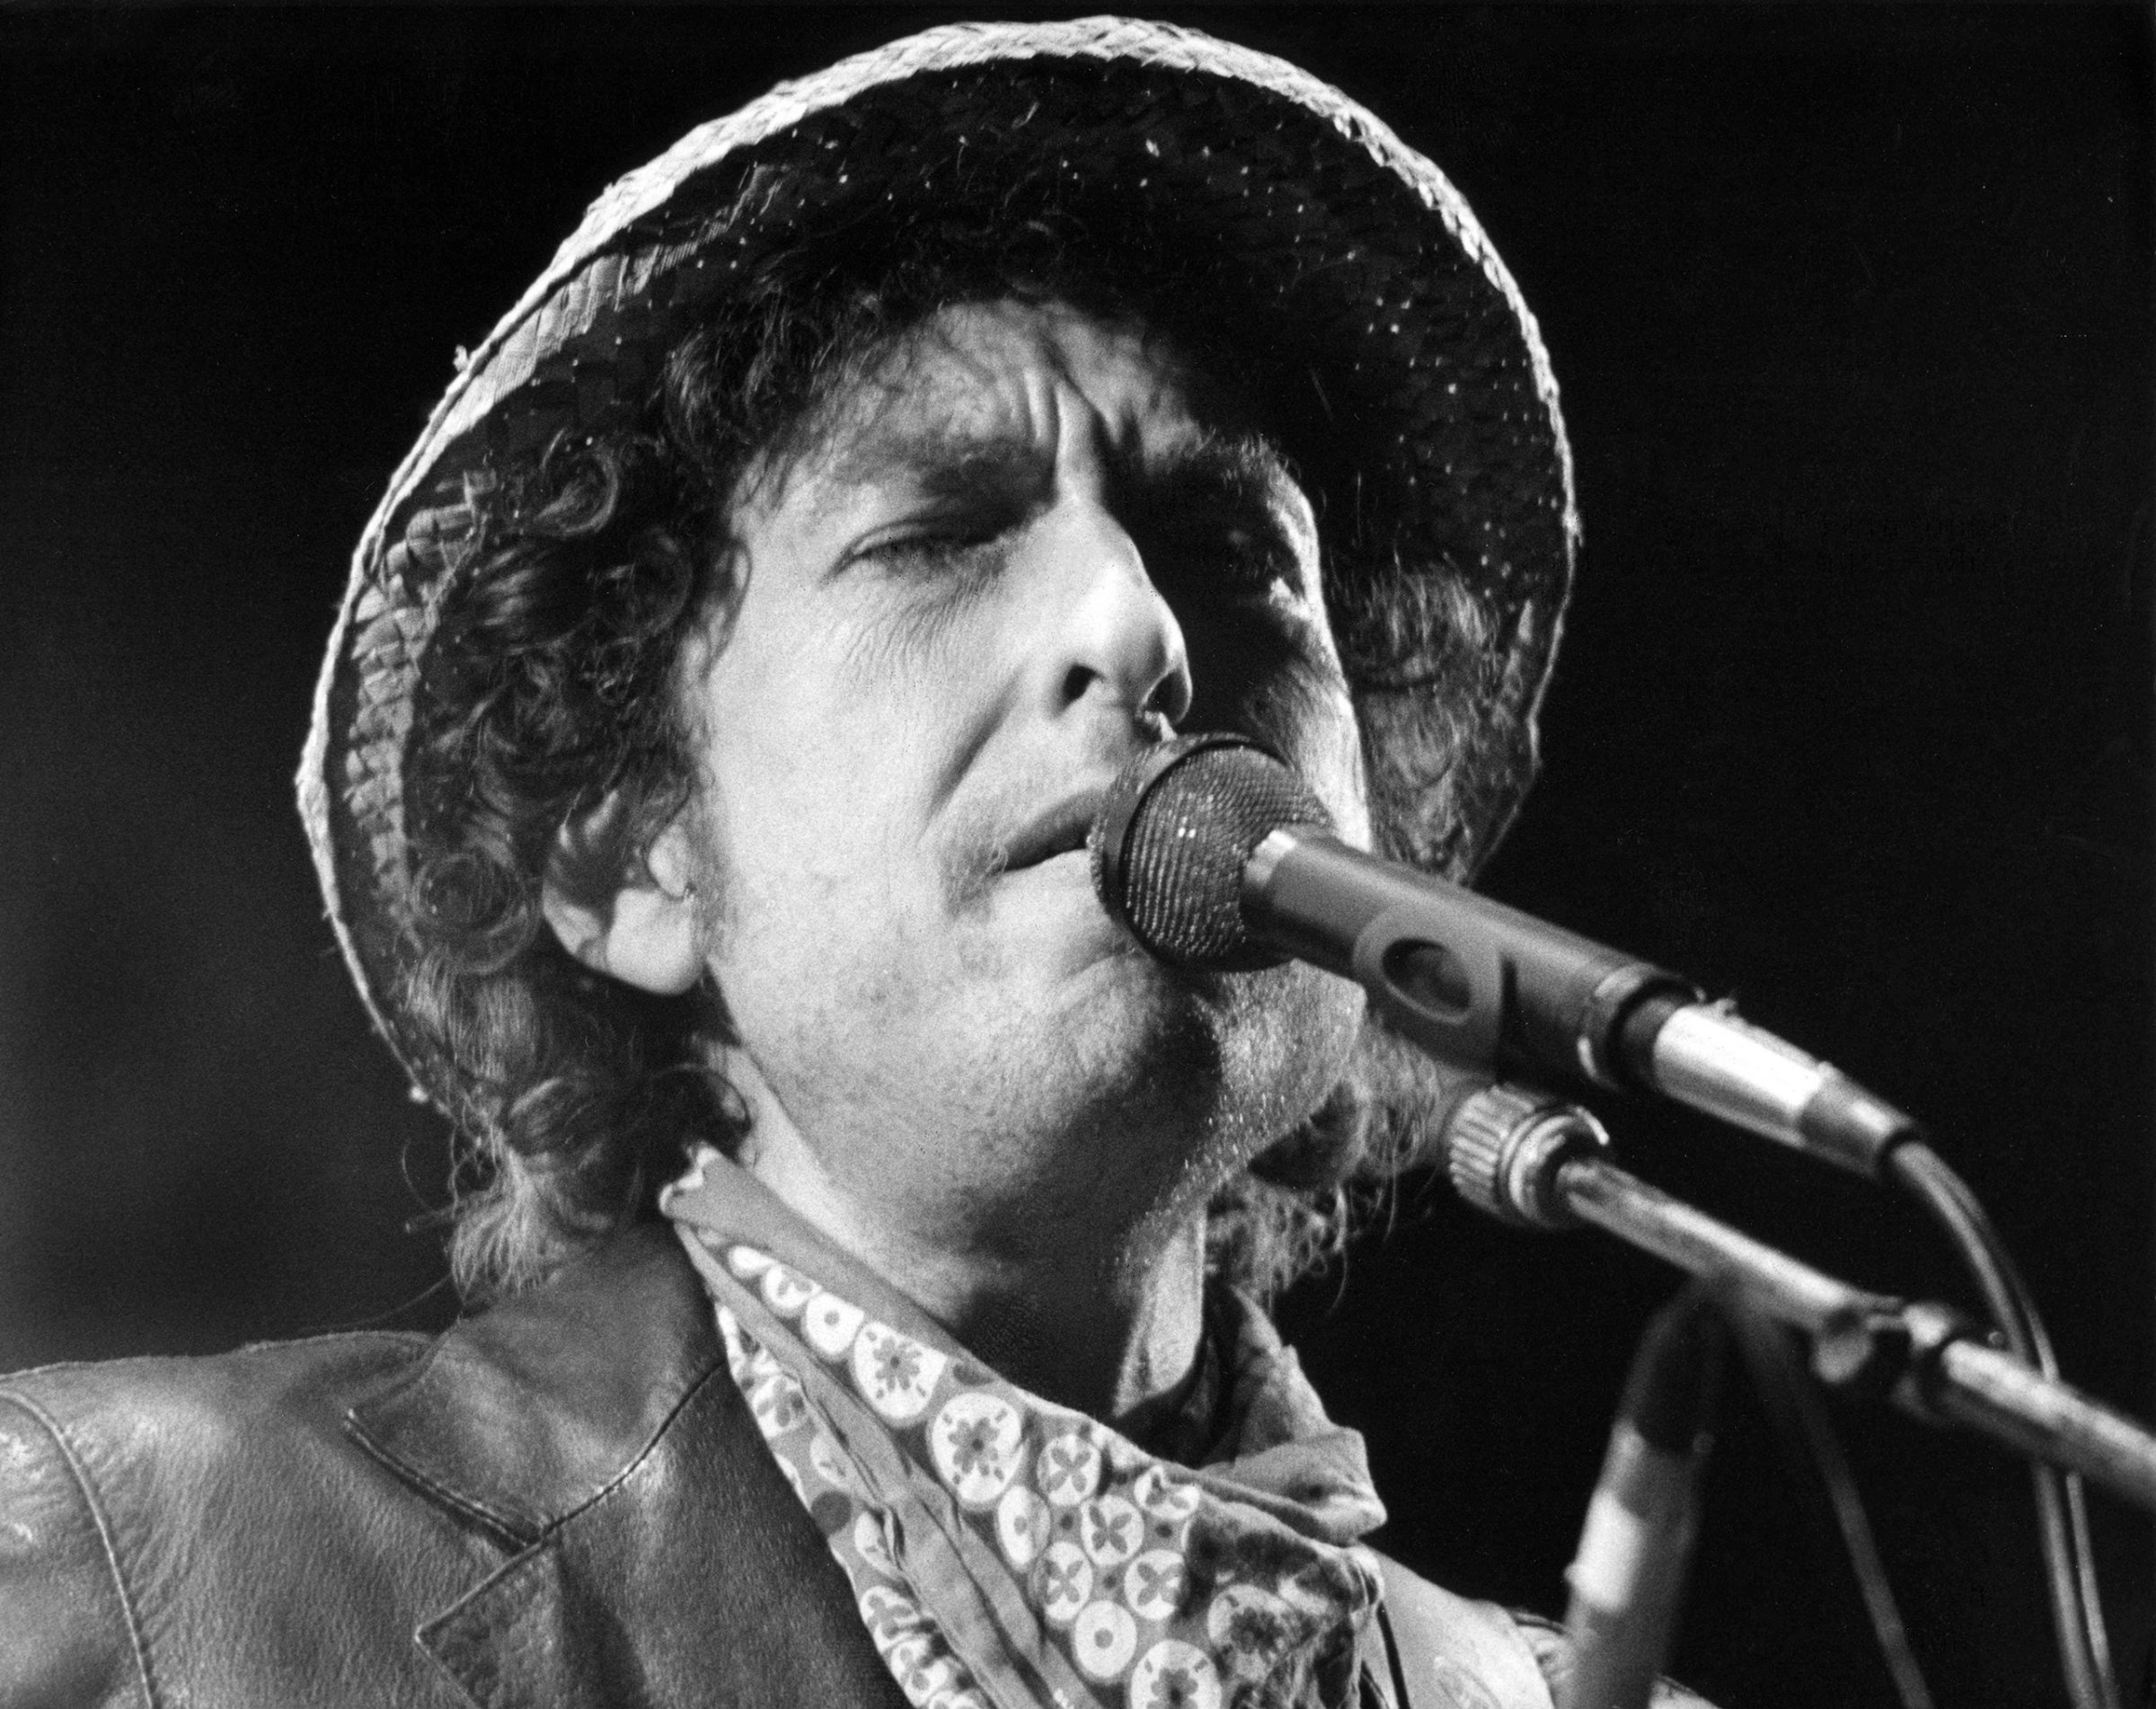 Bob Dylan performs during a concert at the Olympic stadium in Munich, southern Germany, on June 3, 1984. Dylan won the Nobel Prize in Literature on Oct. 13, 2016.